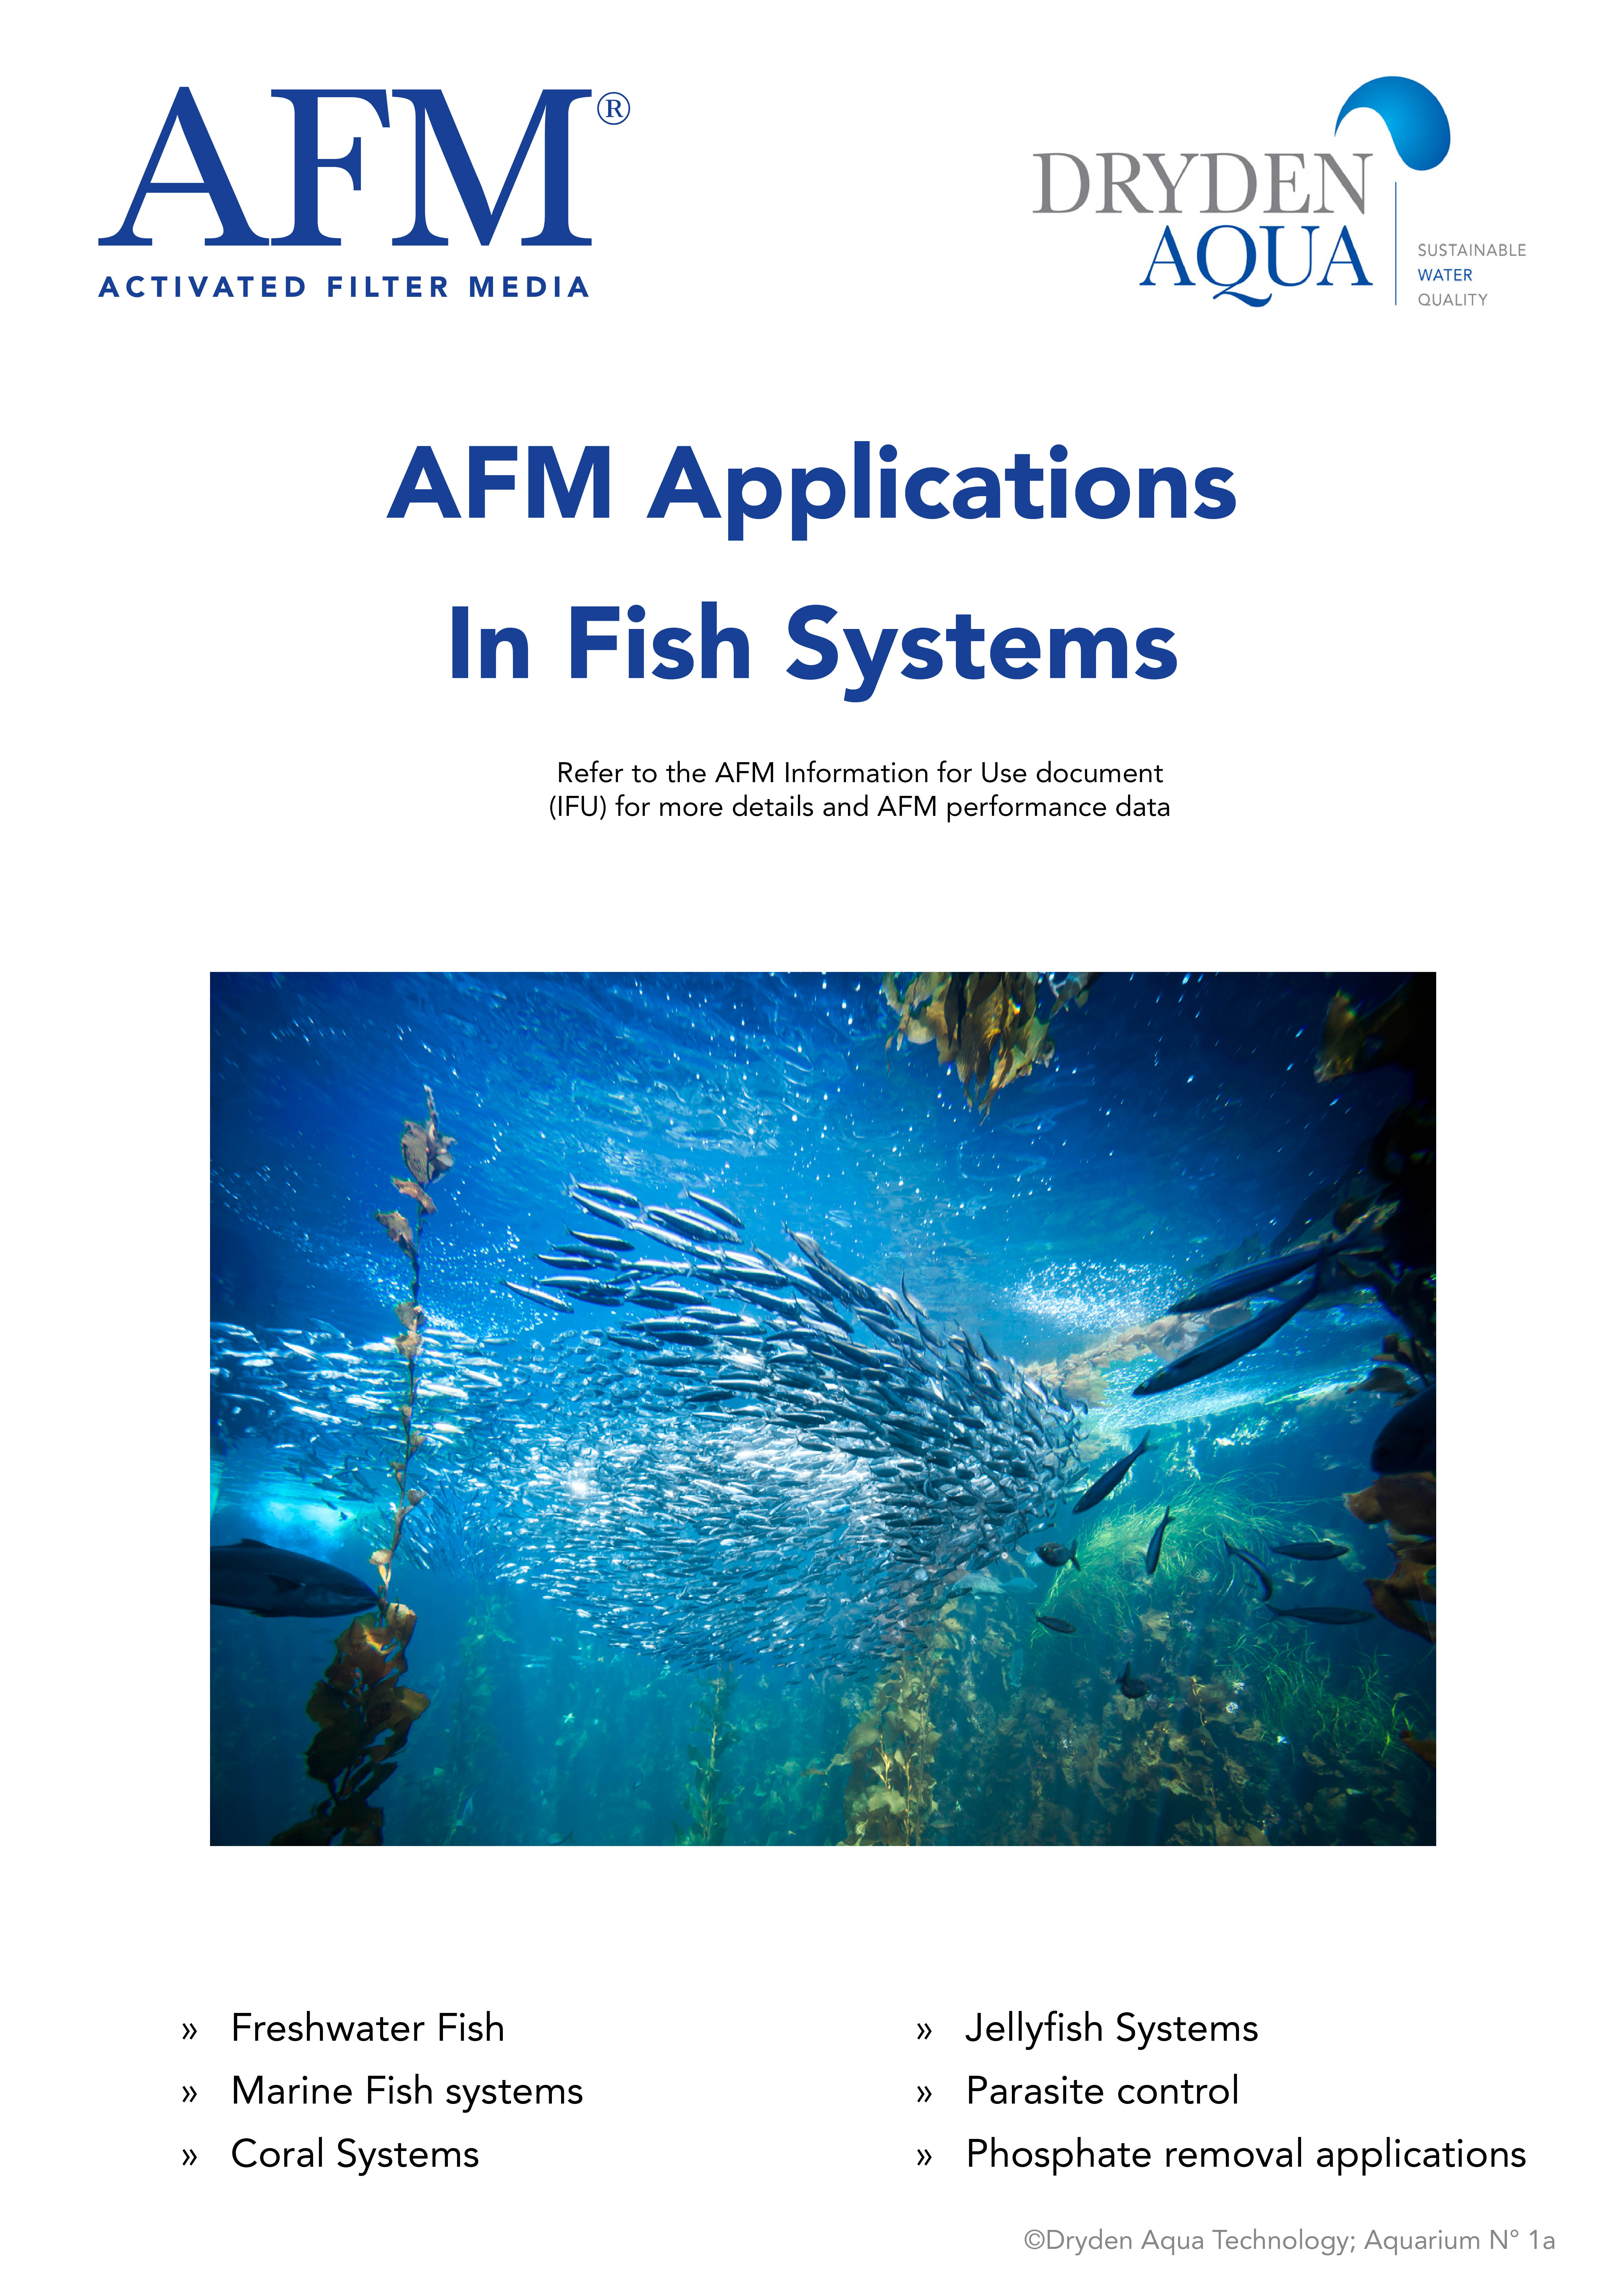 AFM Application in Fish Systems (IFU)